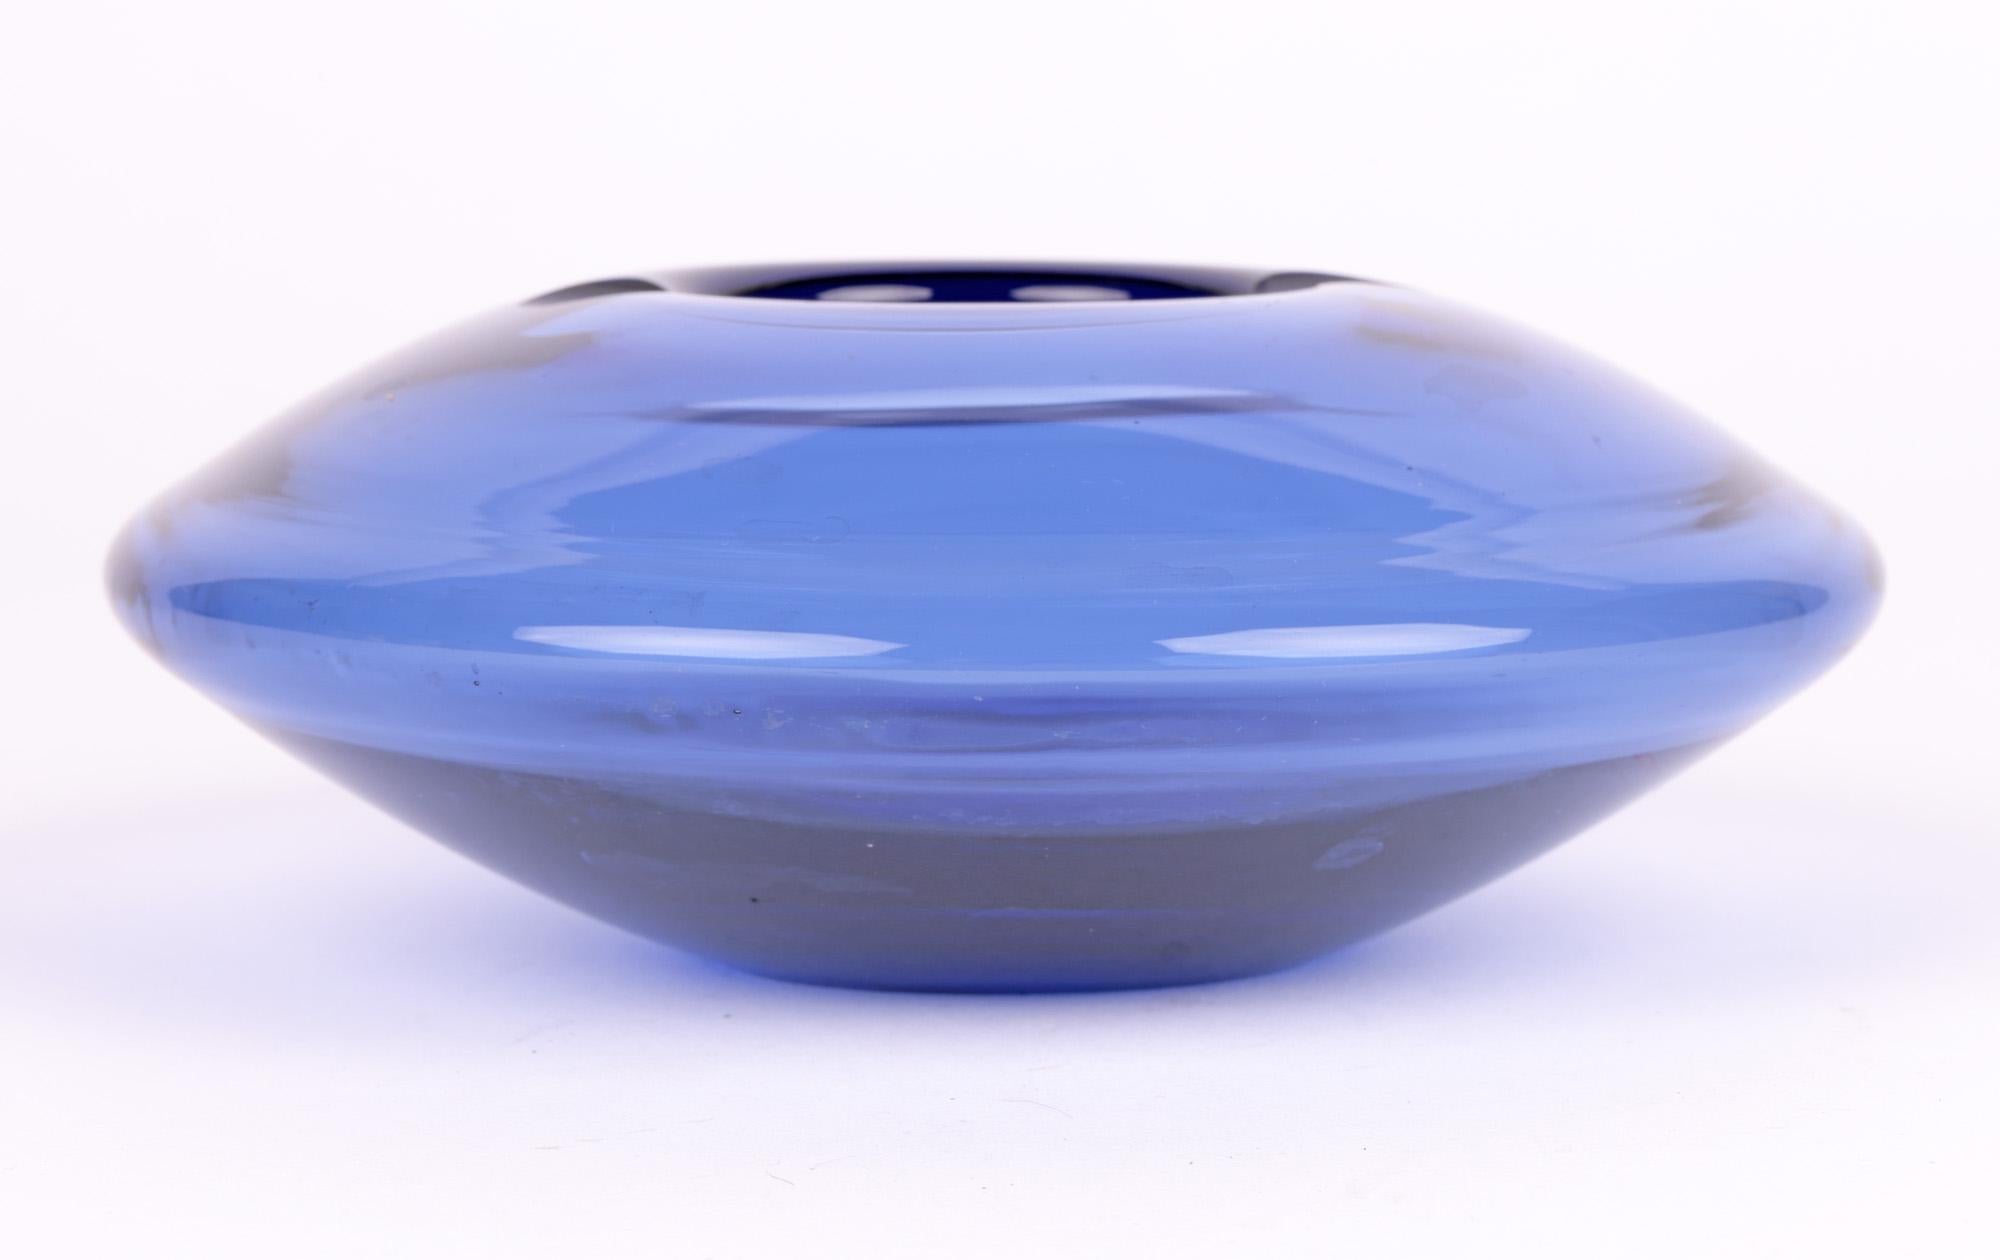 A stylish mid-century Danish blue glass ashtray stylized as a spaceship designed by renowned glass maker Per Lütken (Danish, 1916-1998) for the Holmegaard glass factory and dating from around 1960. 
Per Lütken was a leading designer who worked at